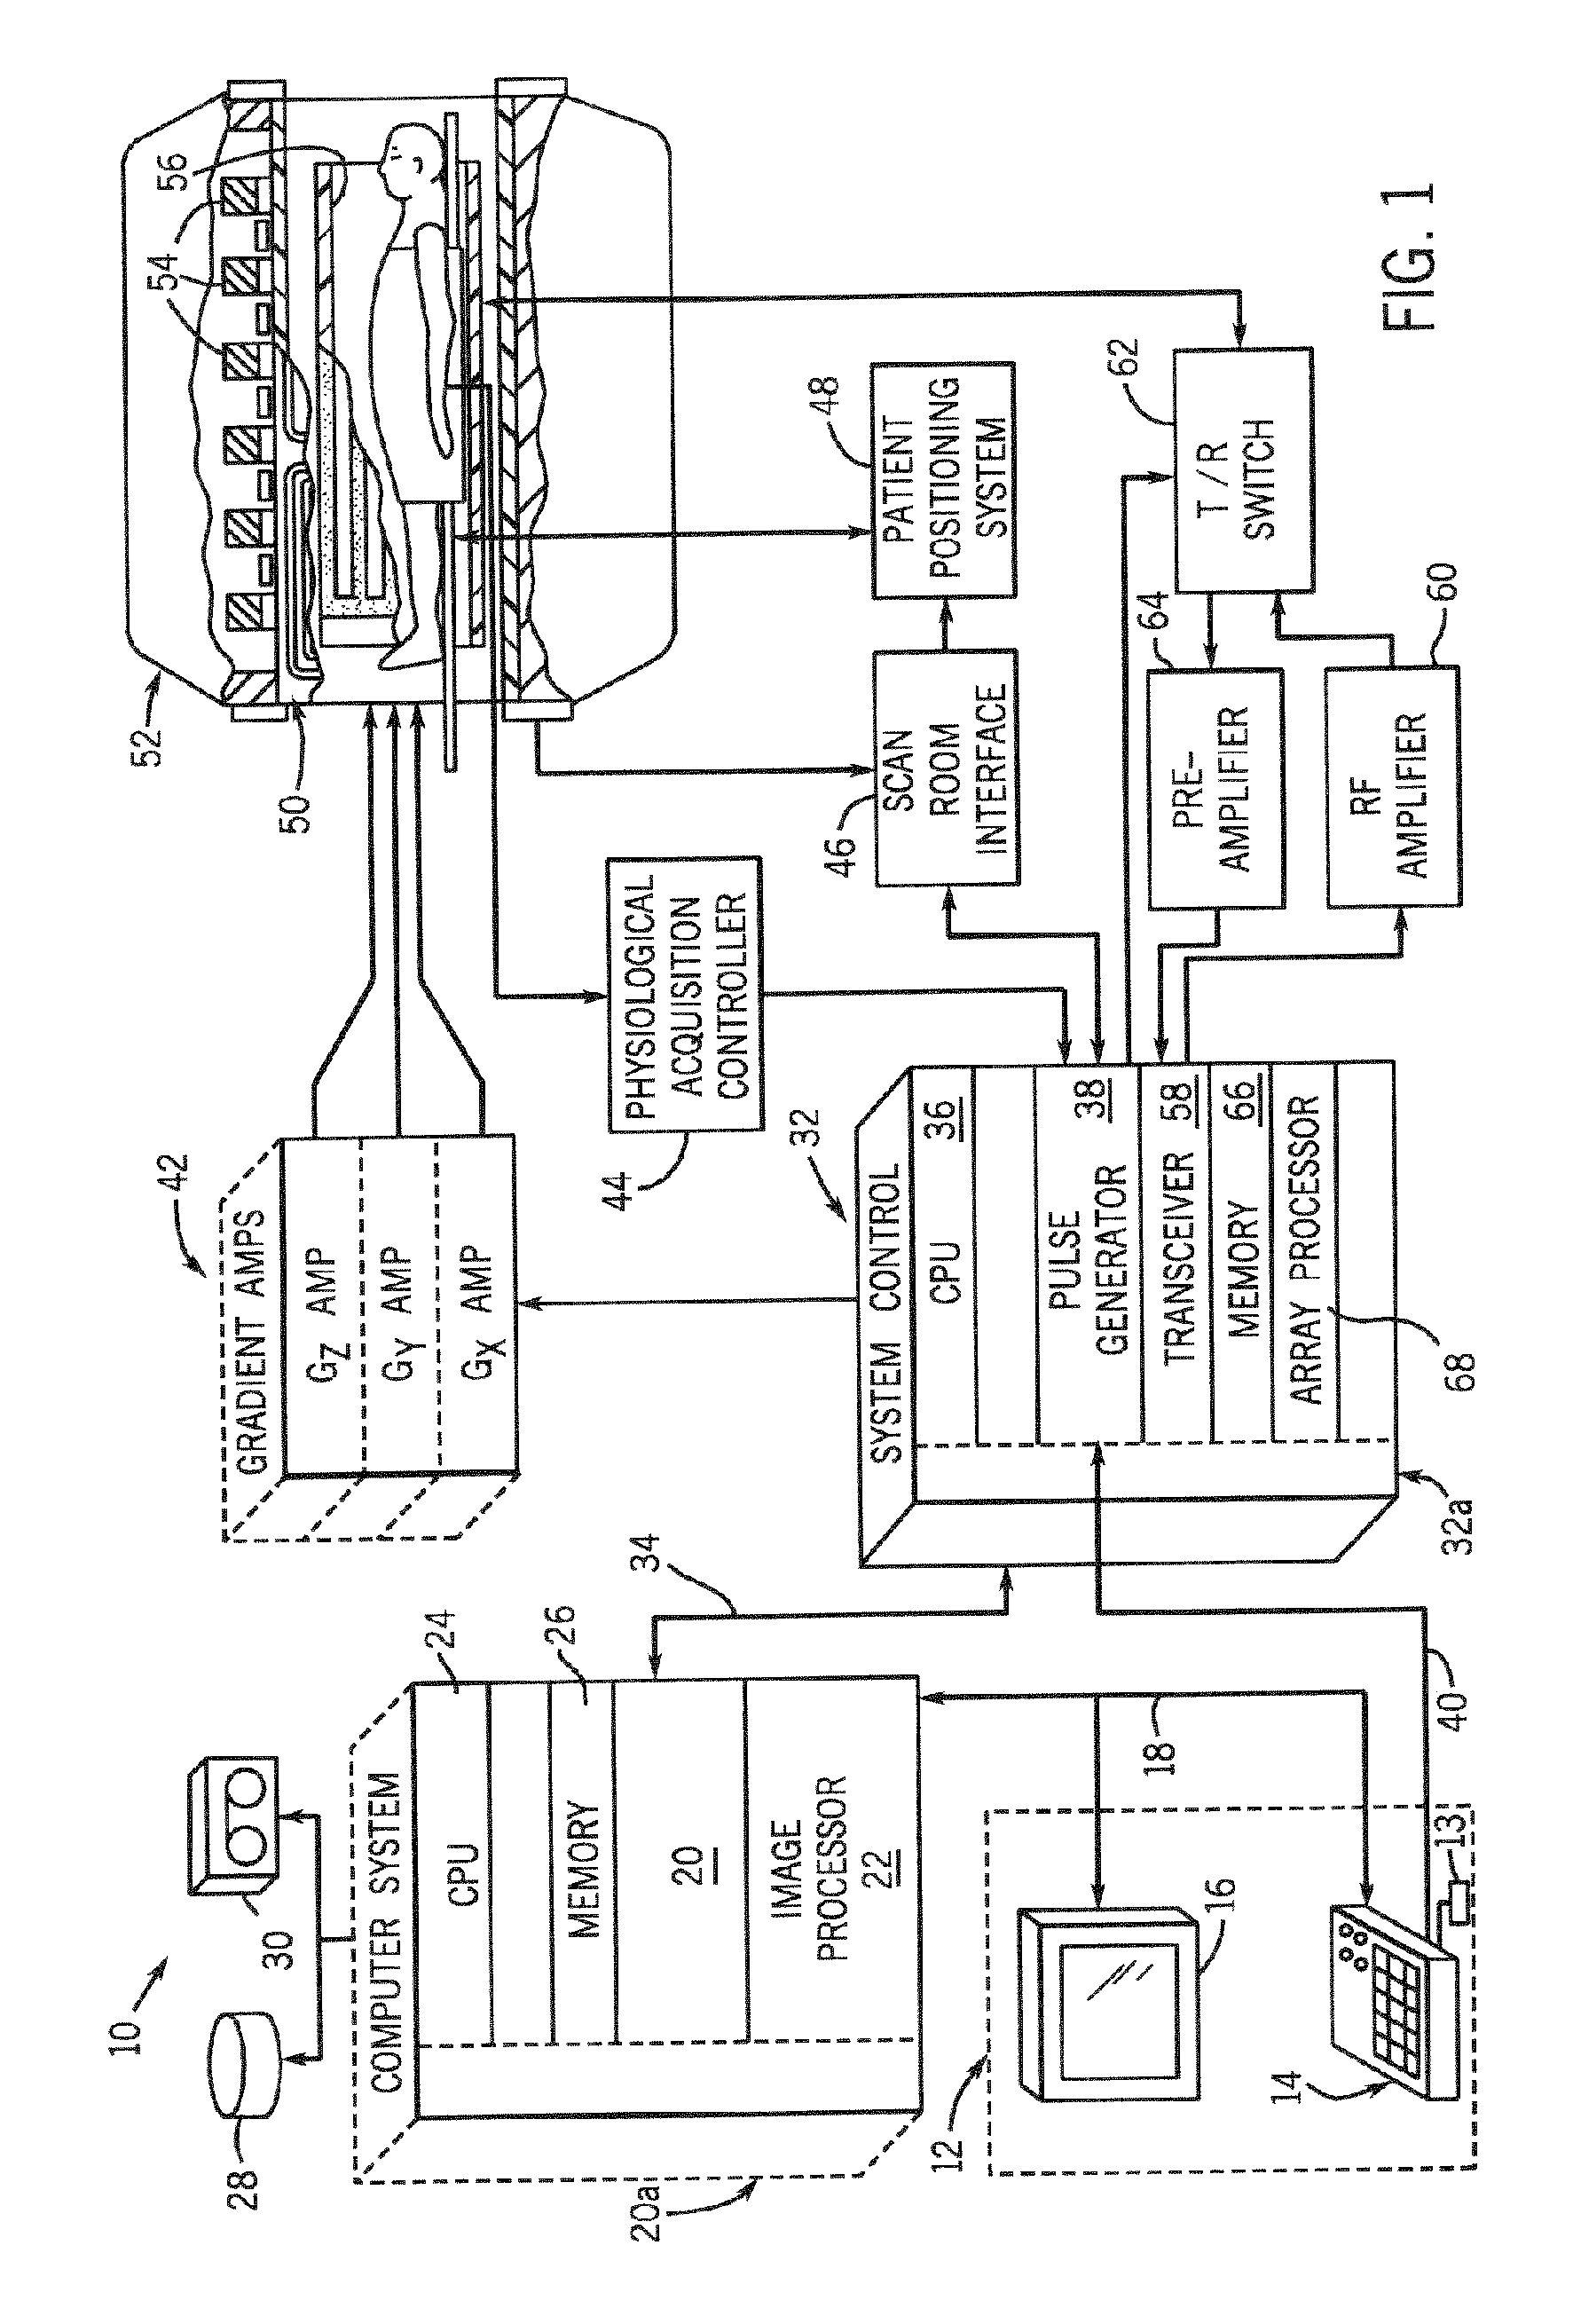 Method and apparatus for fast spin echo (FSE) prescan phase correction